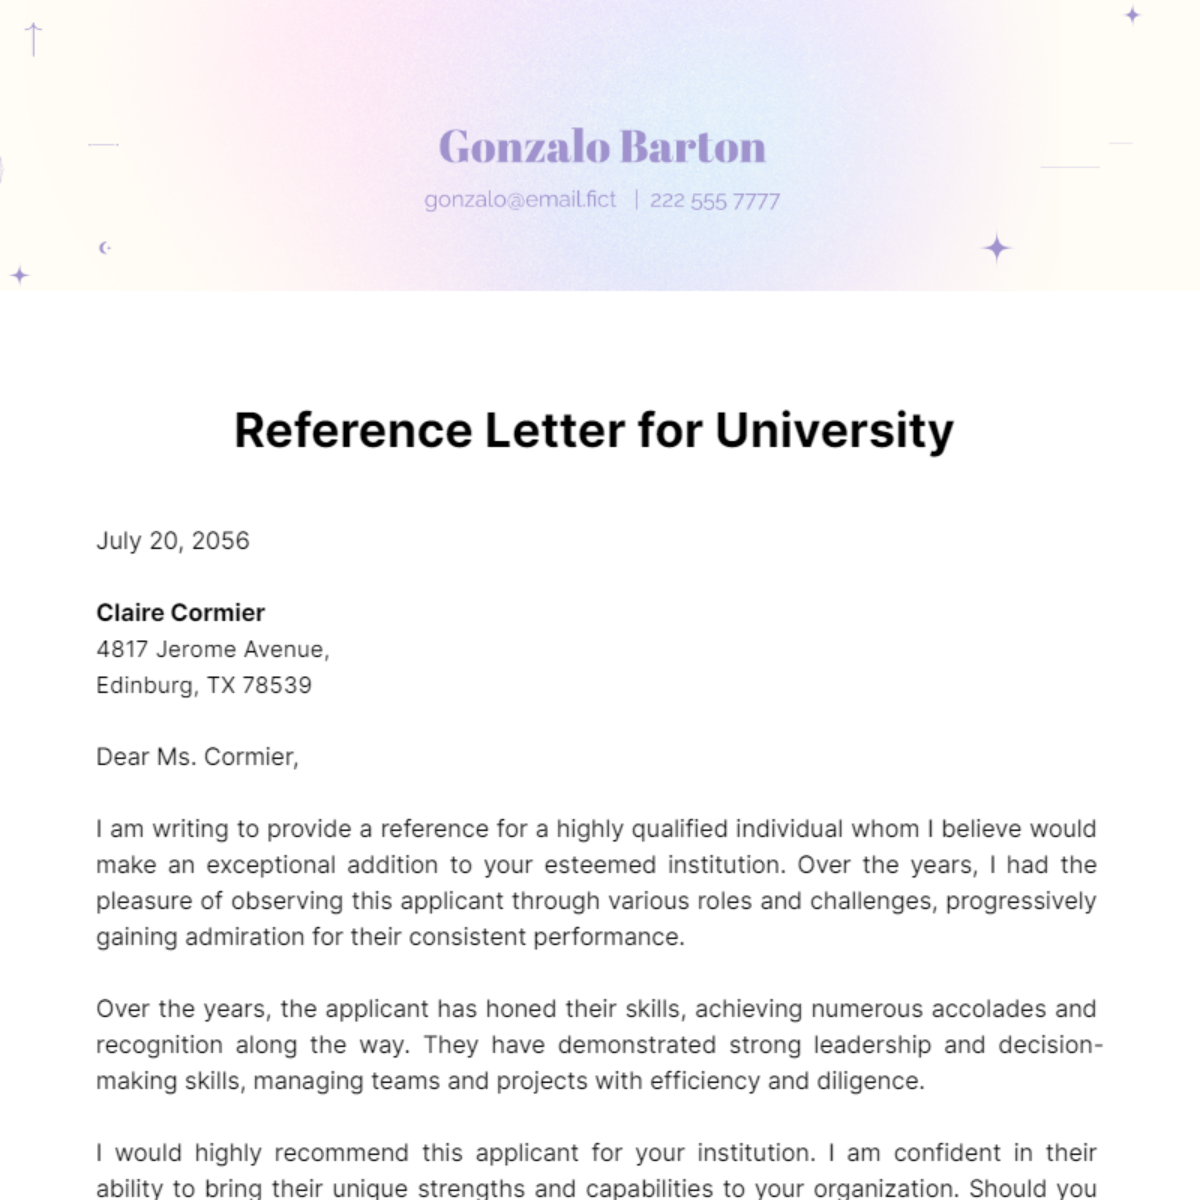 Reference Letter for University Template